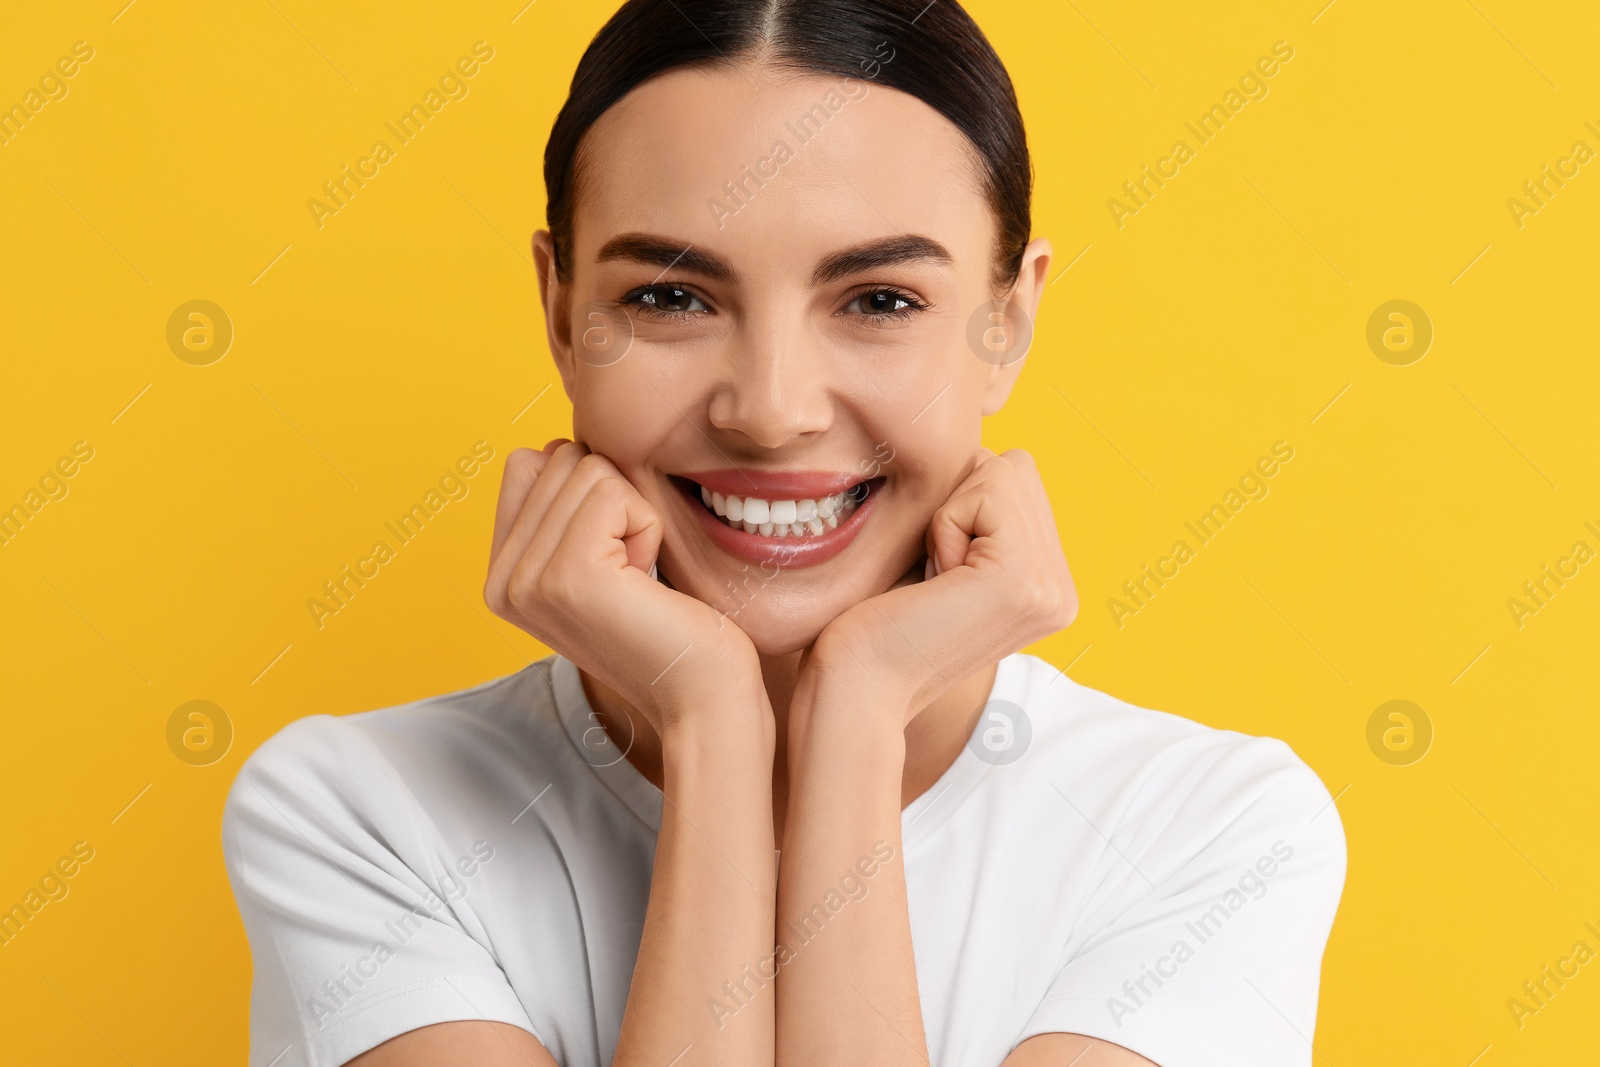 Photo of Beautiful woman with clean teeth smiling on yellow background